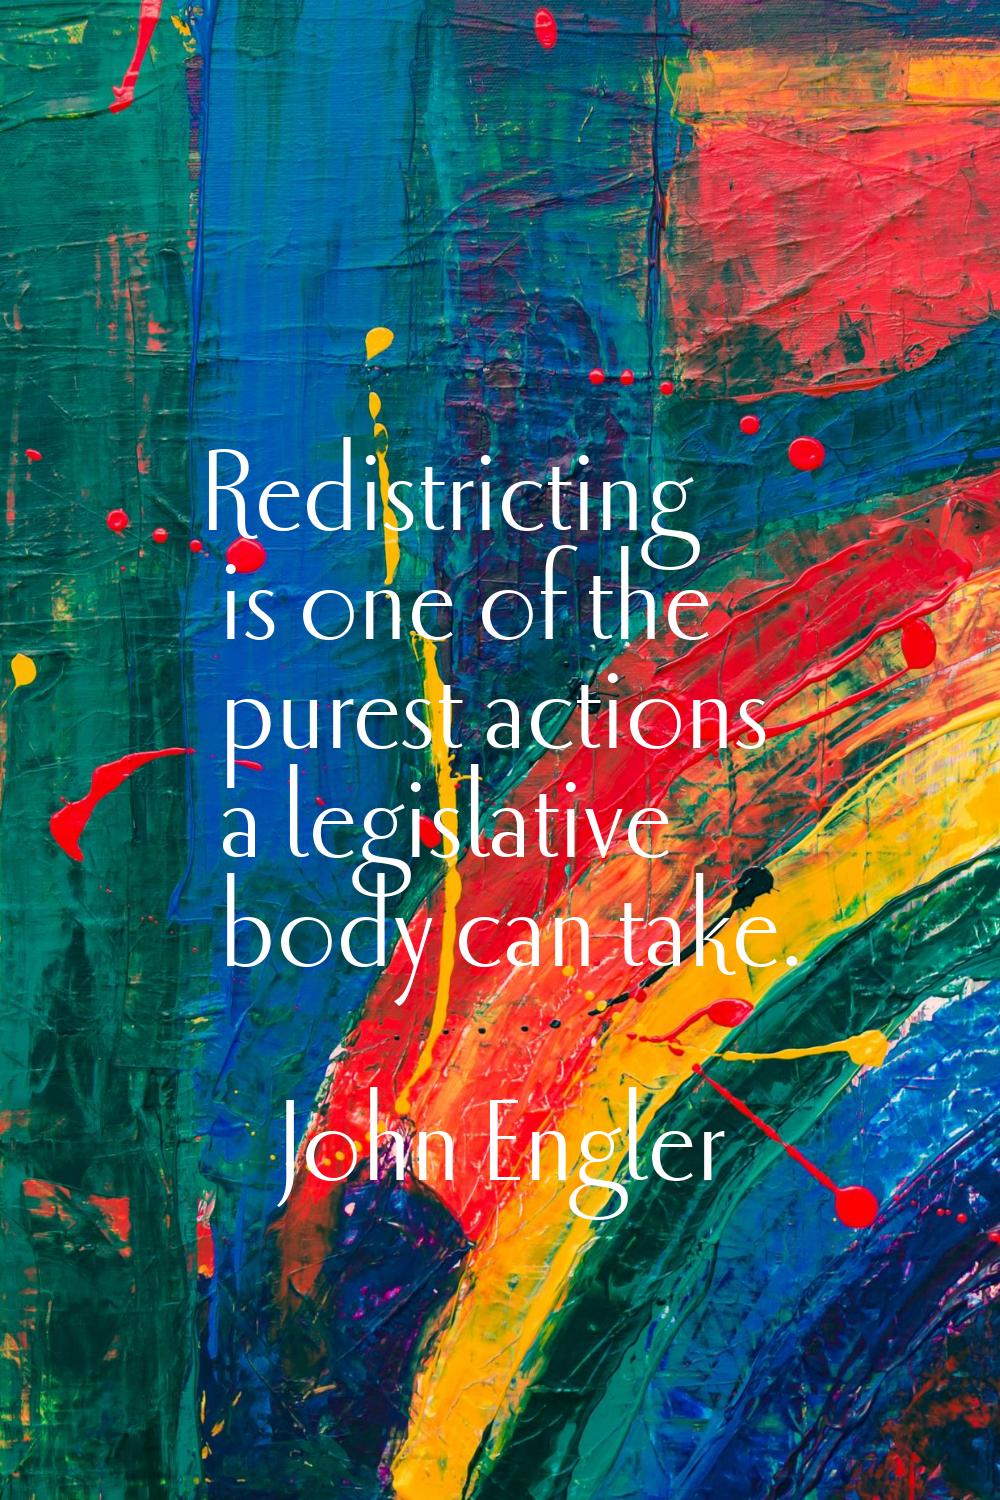 Redistricting is one of the purest actions a legislative body can take.